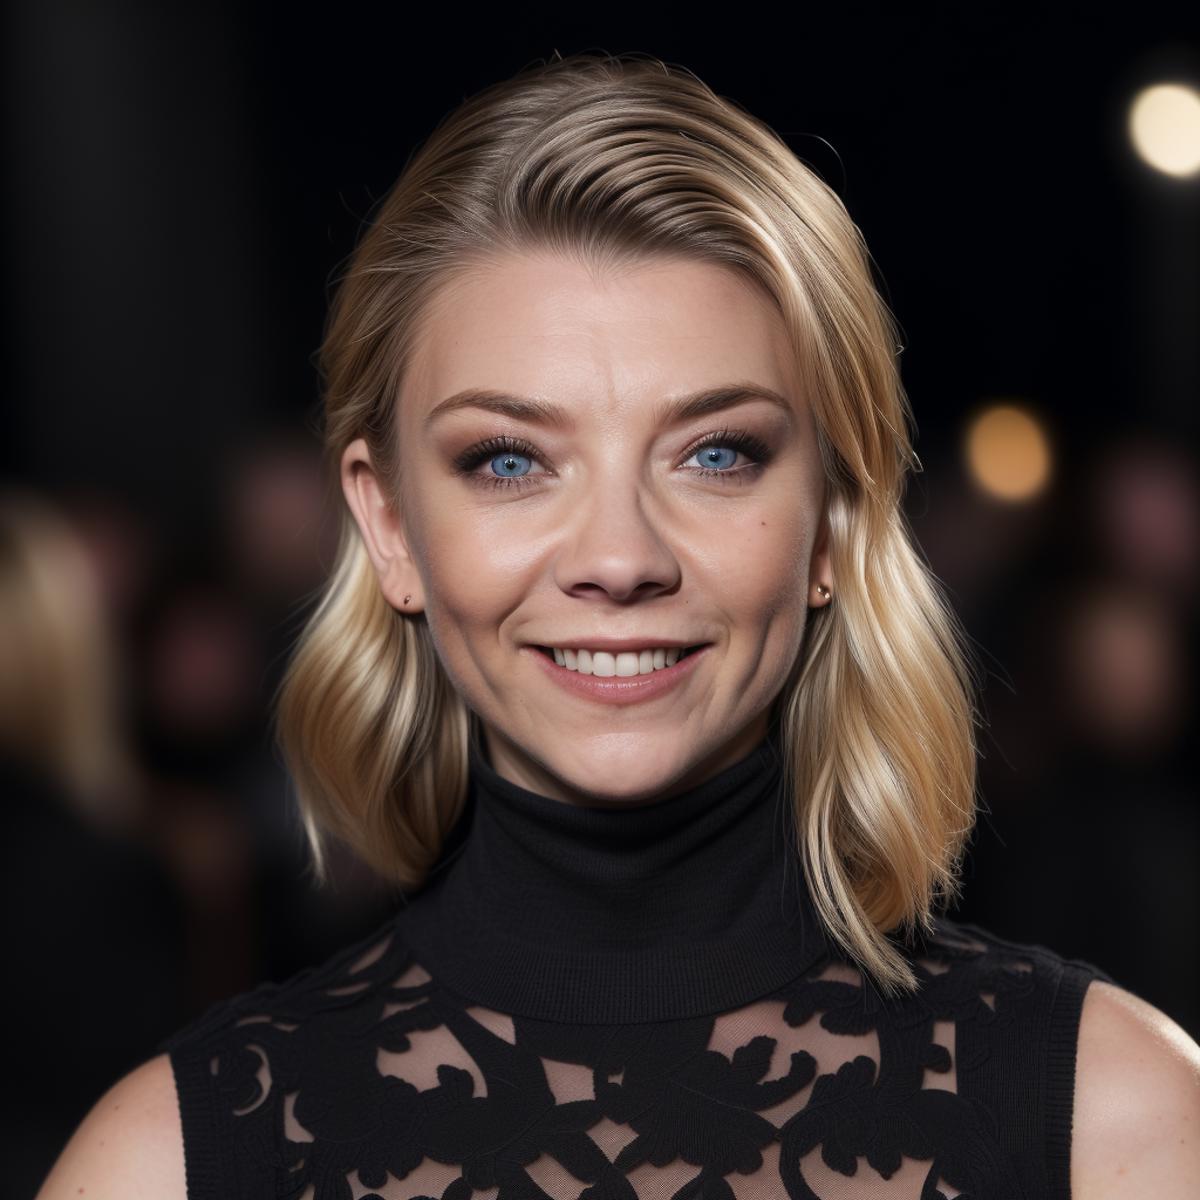 Natalie Dormer image by infamous__fish